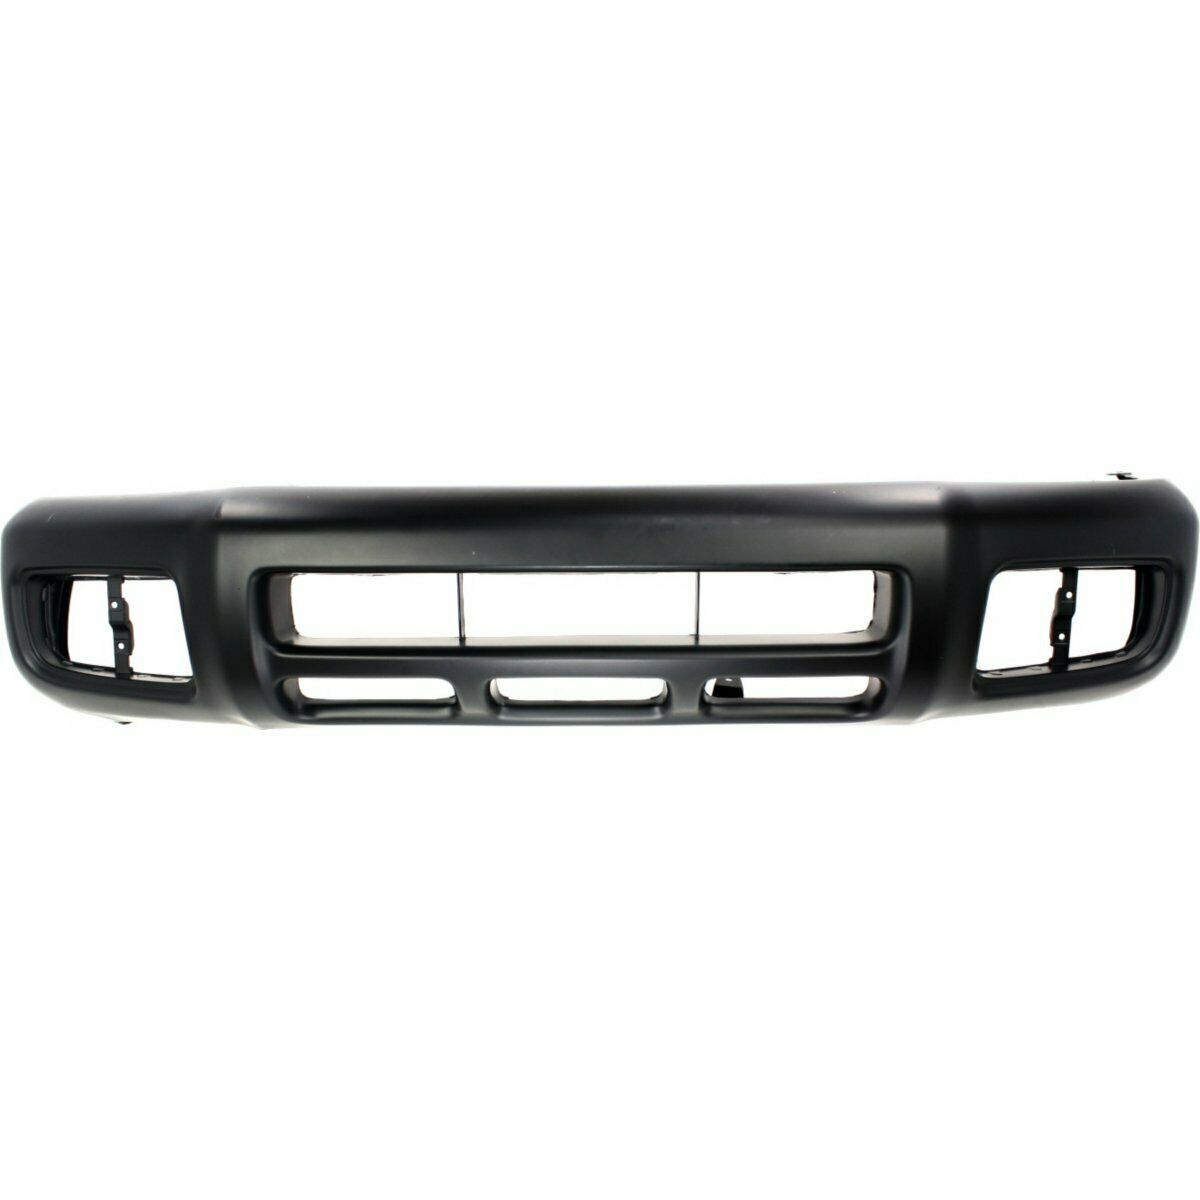 2000-2002 Nissan Pathfinder Front Bumper Painted to Match